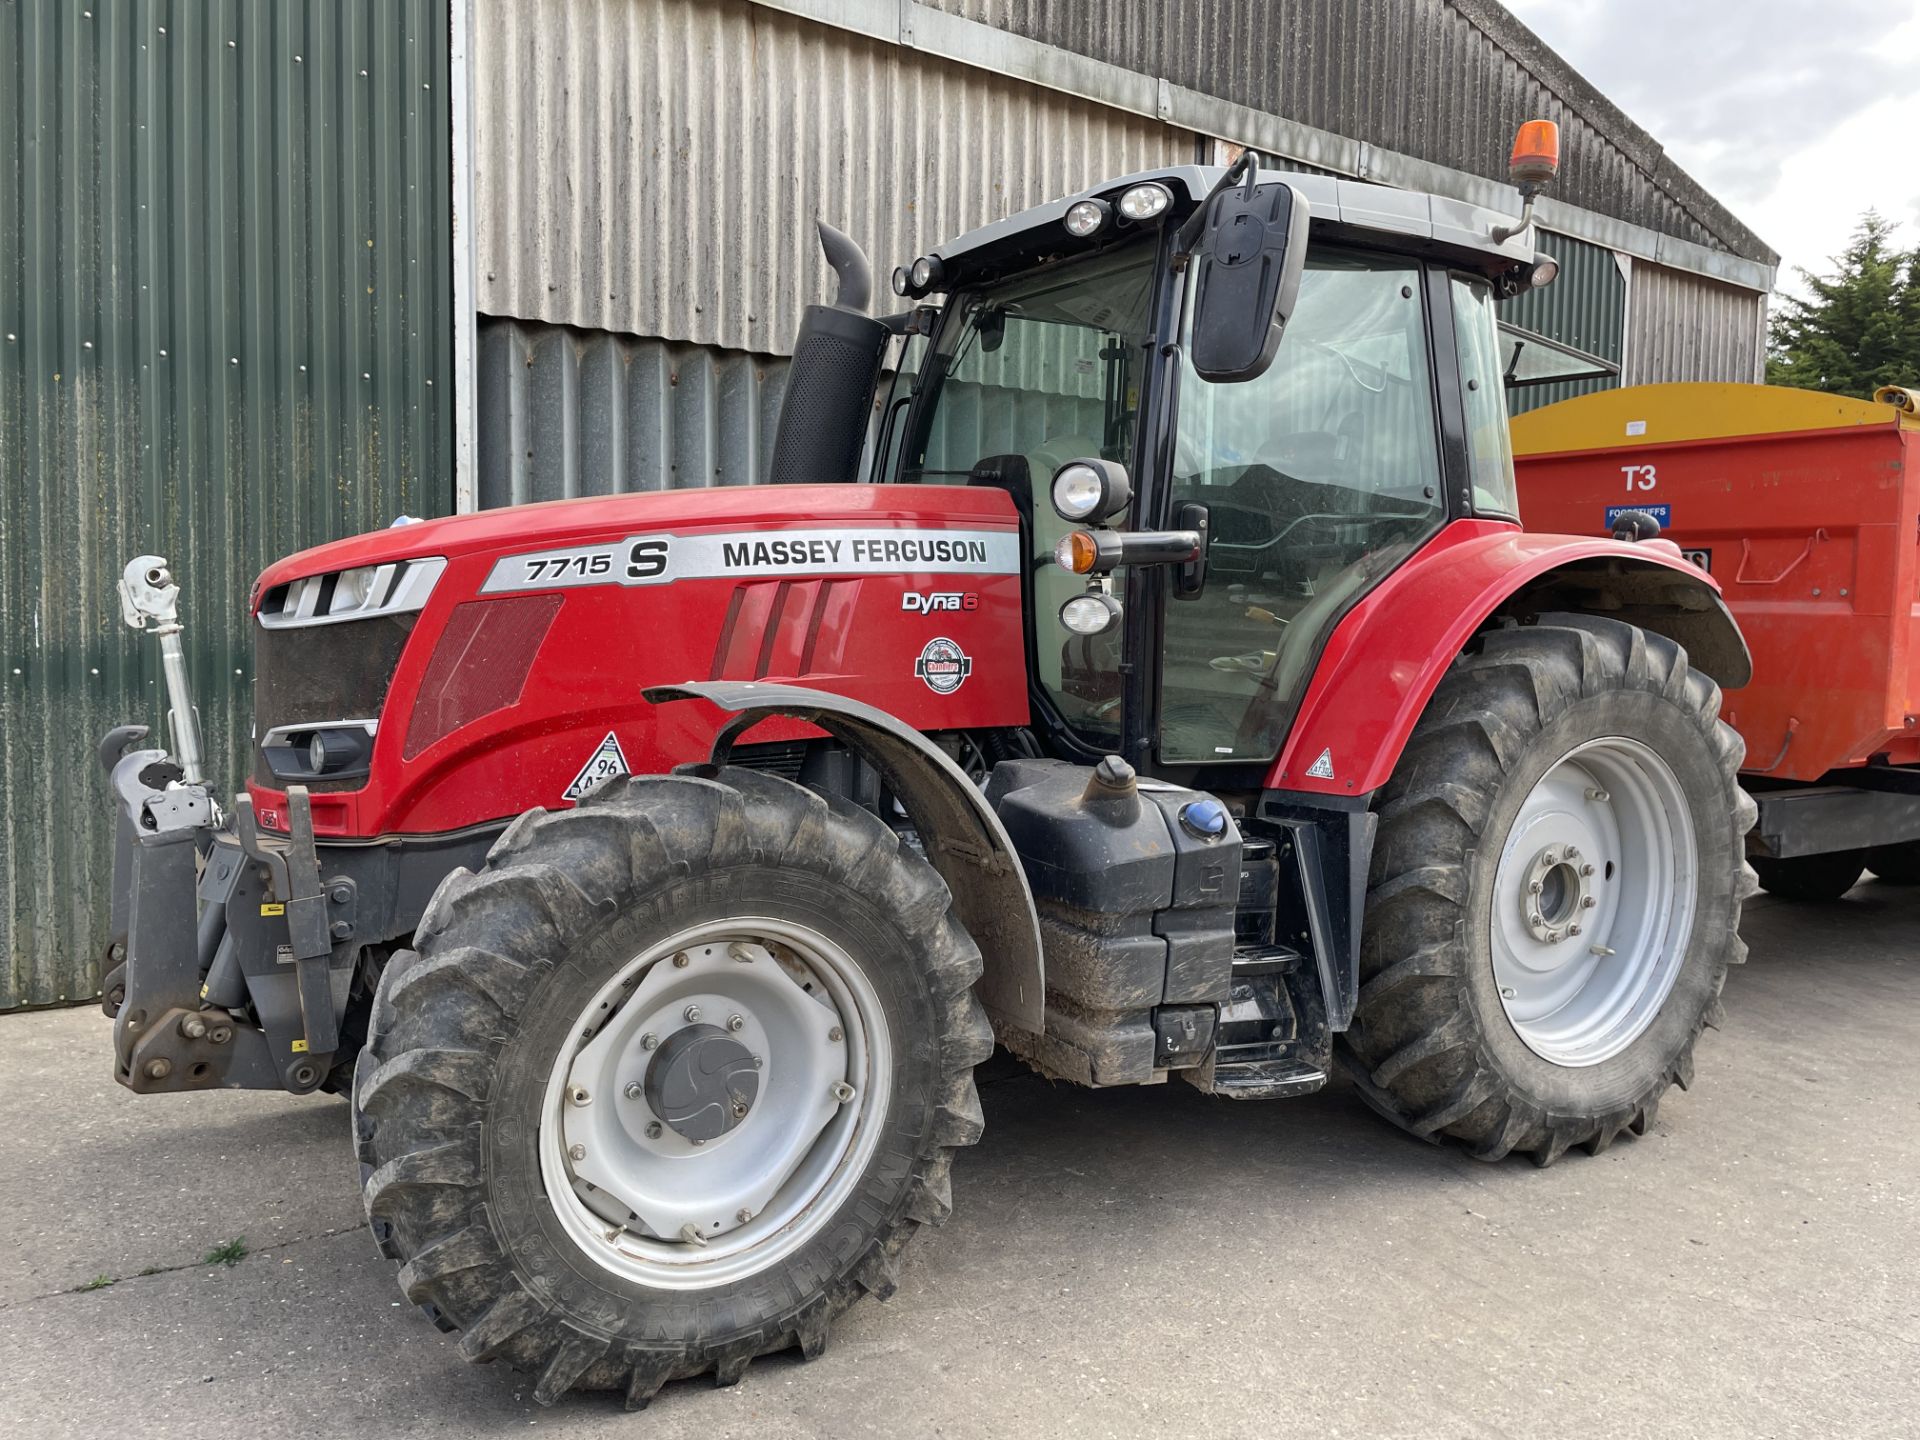 (91) Massey Ferguson 7715S Dyna-6 • 50kph 4WD tractor • Efficient spec with 50k gear box • D Tractor - Image 4 of 14